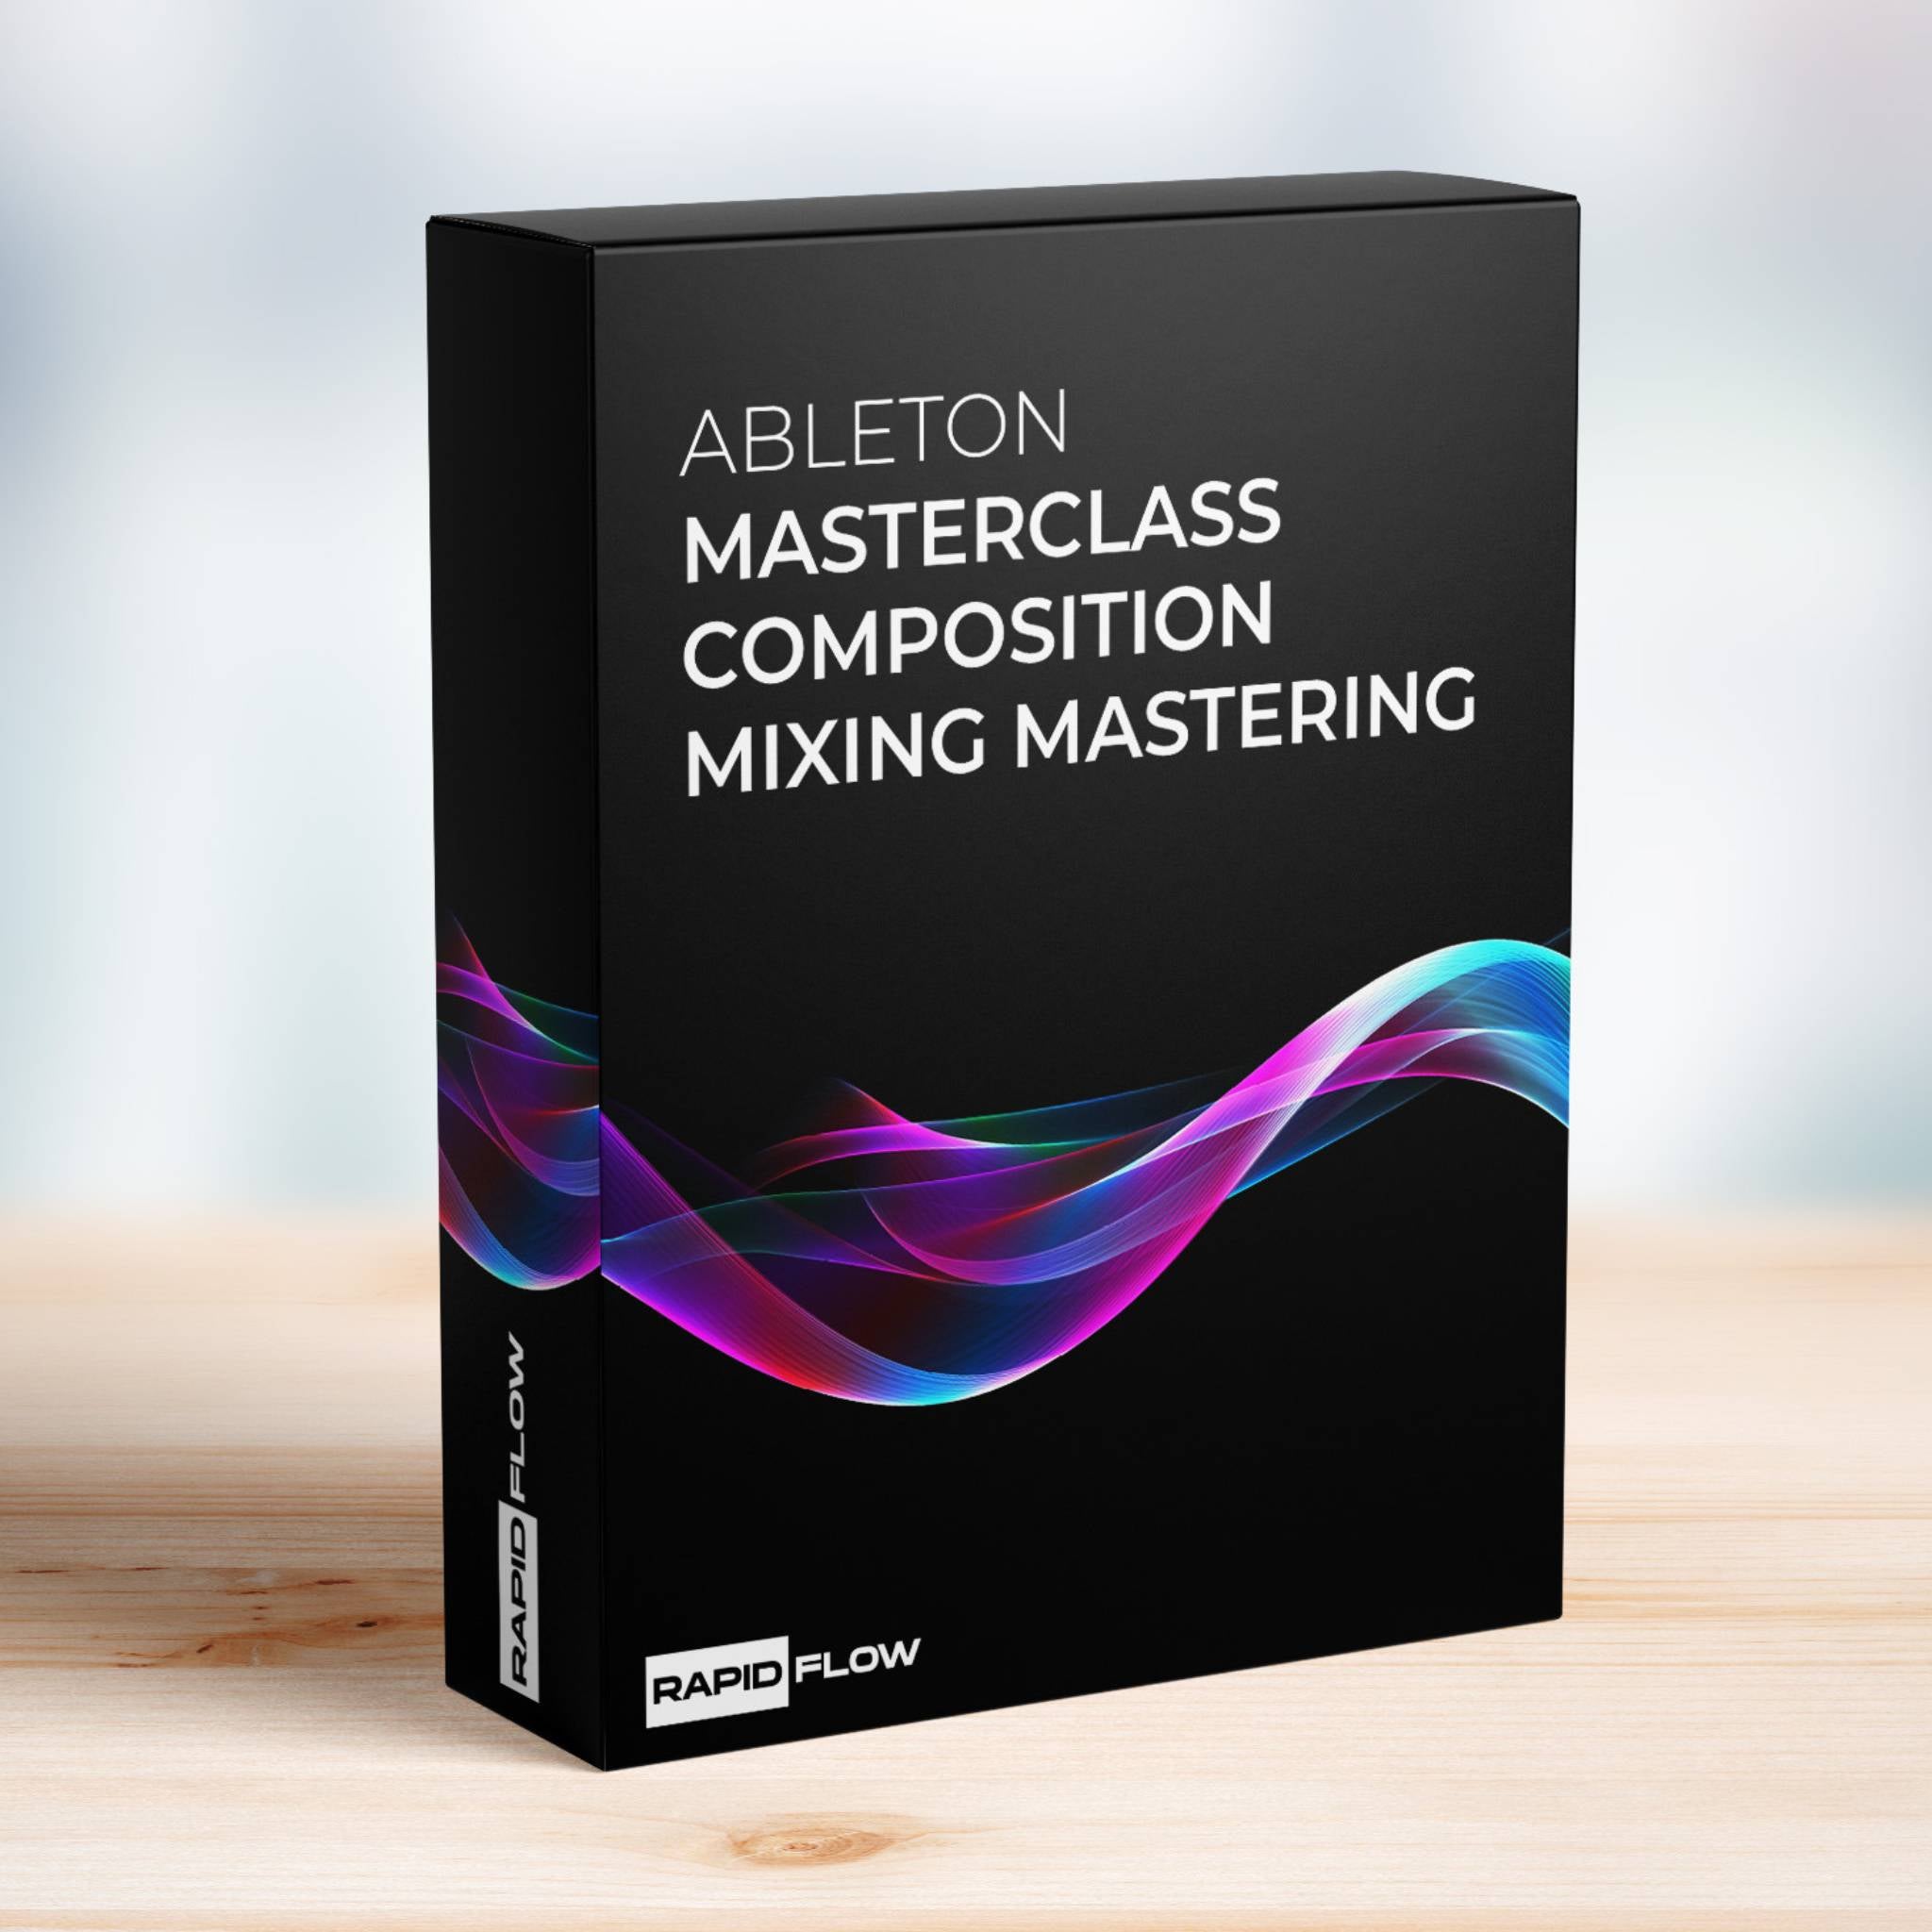 Ableton Masterclass Composition Mixing Mastering | Rapid Flow